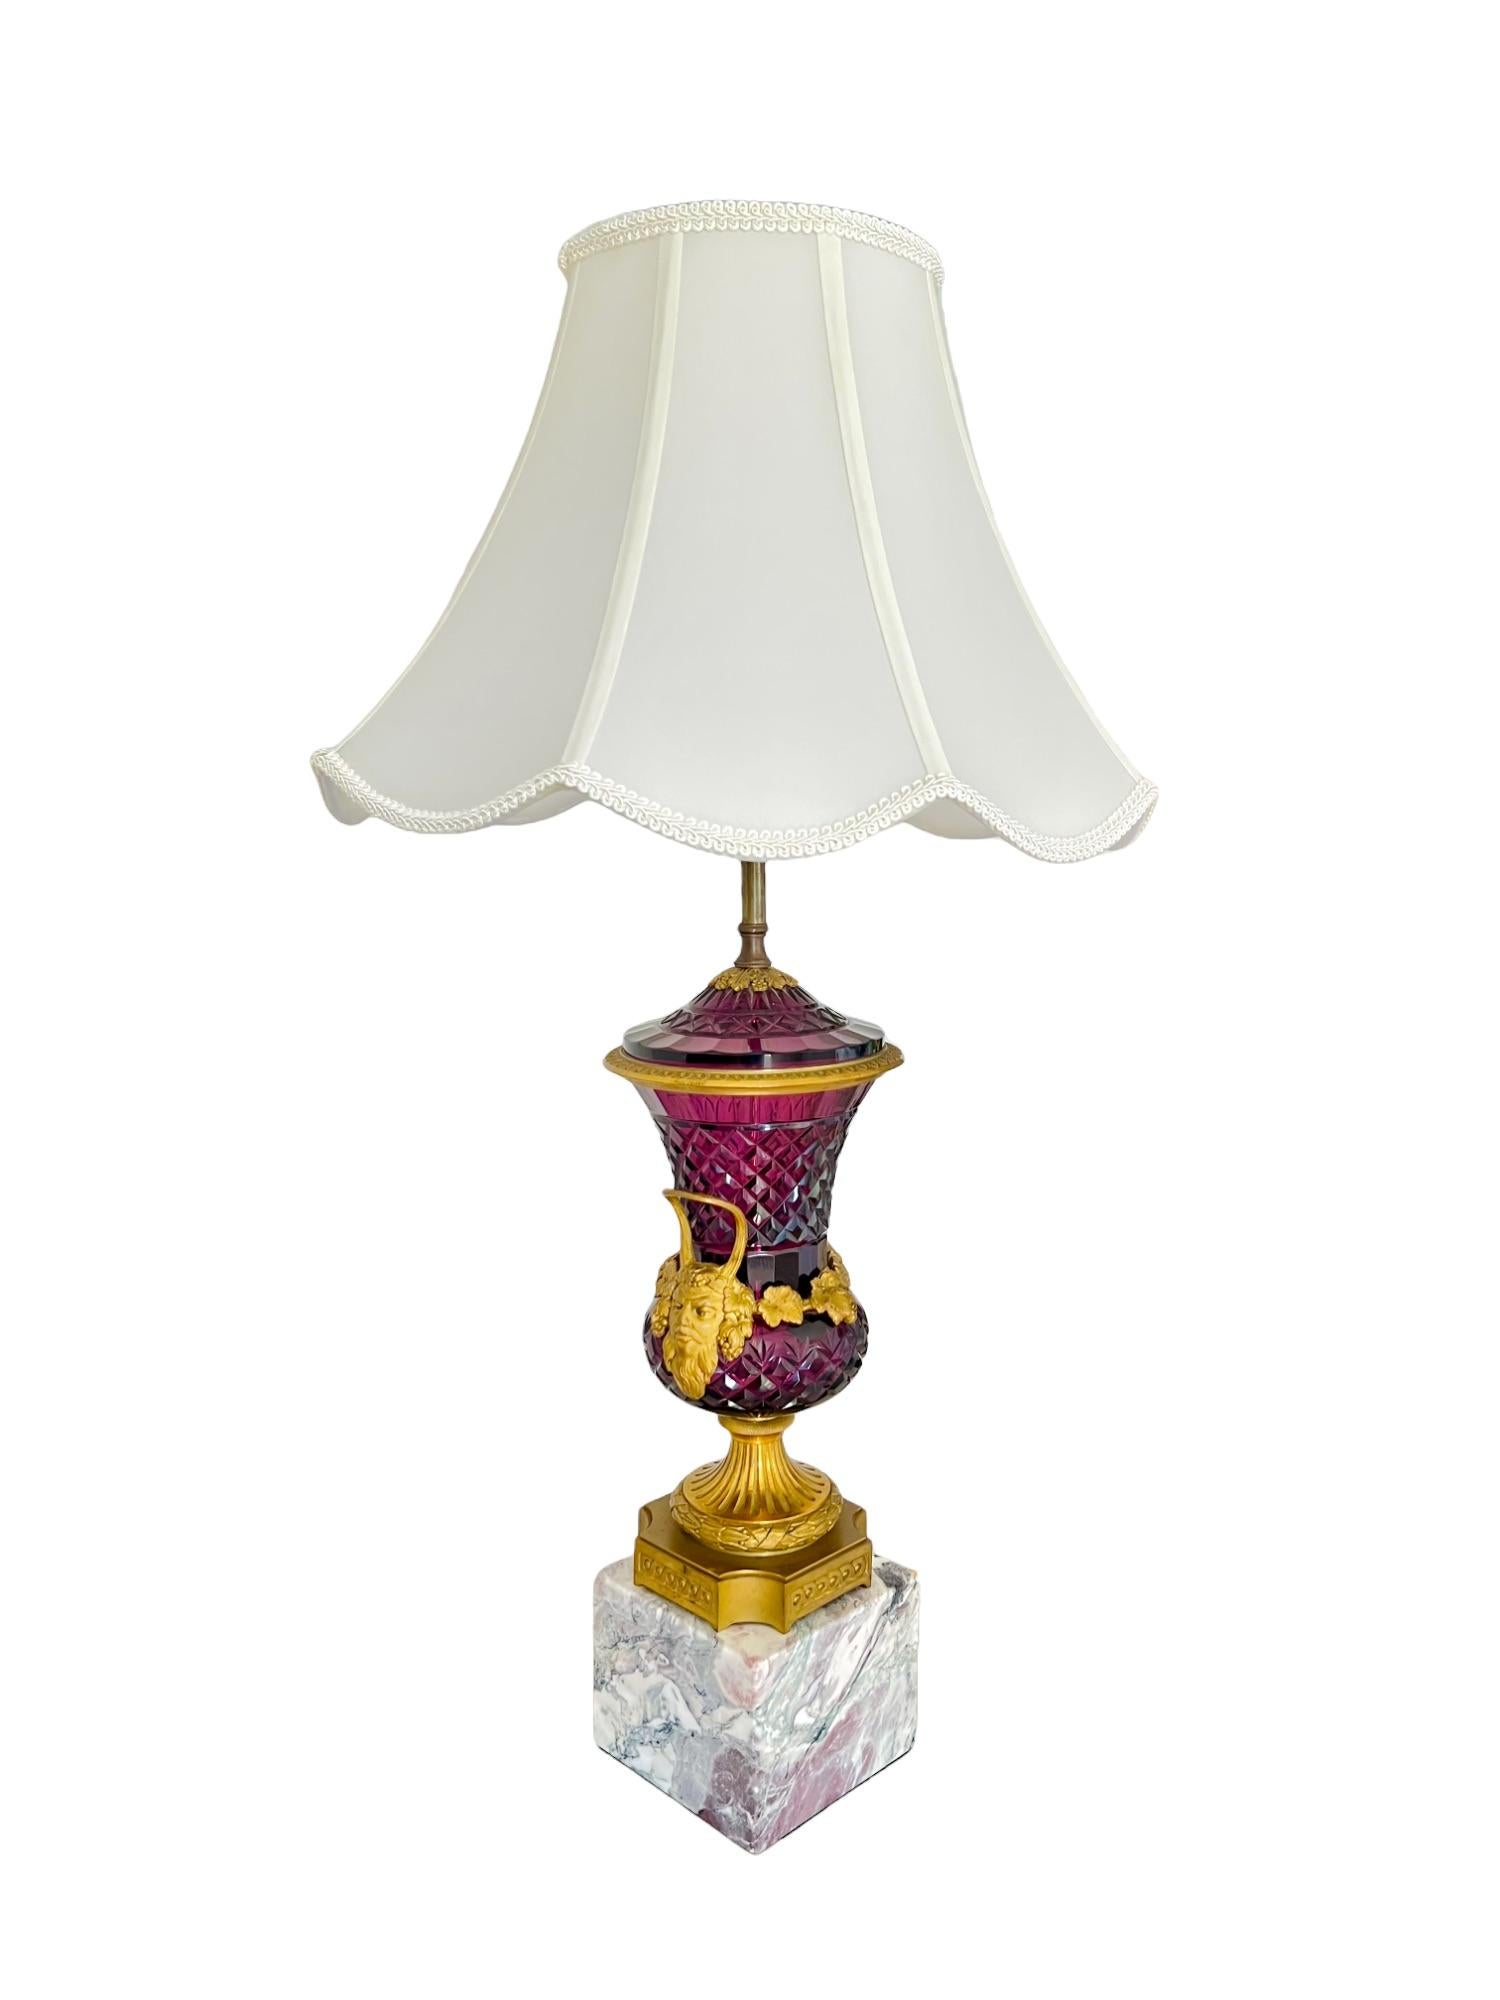 An antique late 19th century cut amethyst glass lidded campana urn vase from Austria, set atop a marble block and converted into a dual socket table lamp with pull cord operation. The stunning vase features diamond facets, a Bacchus themed motif